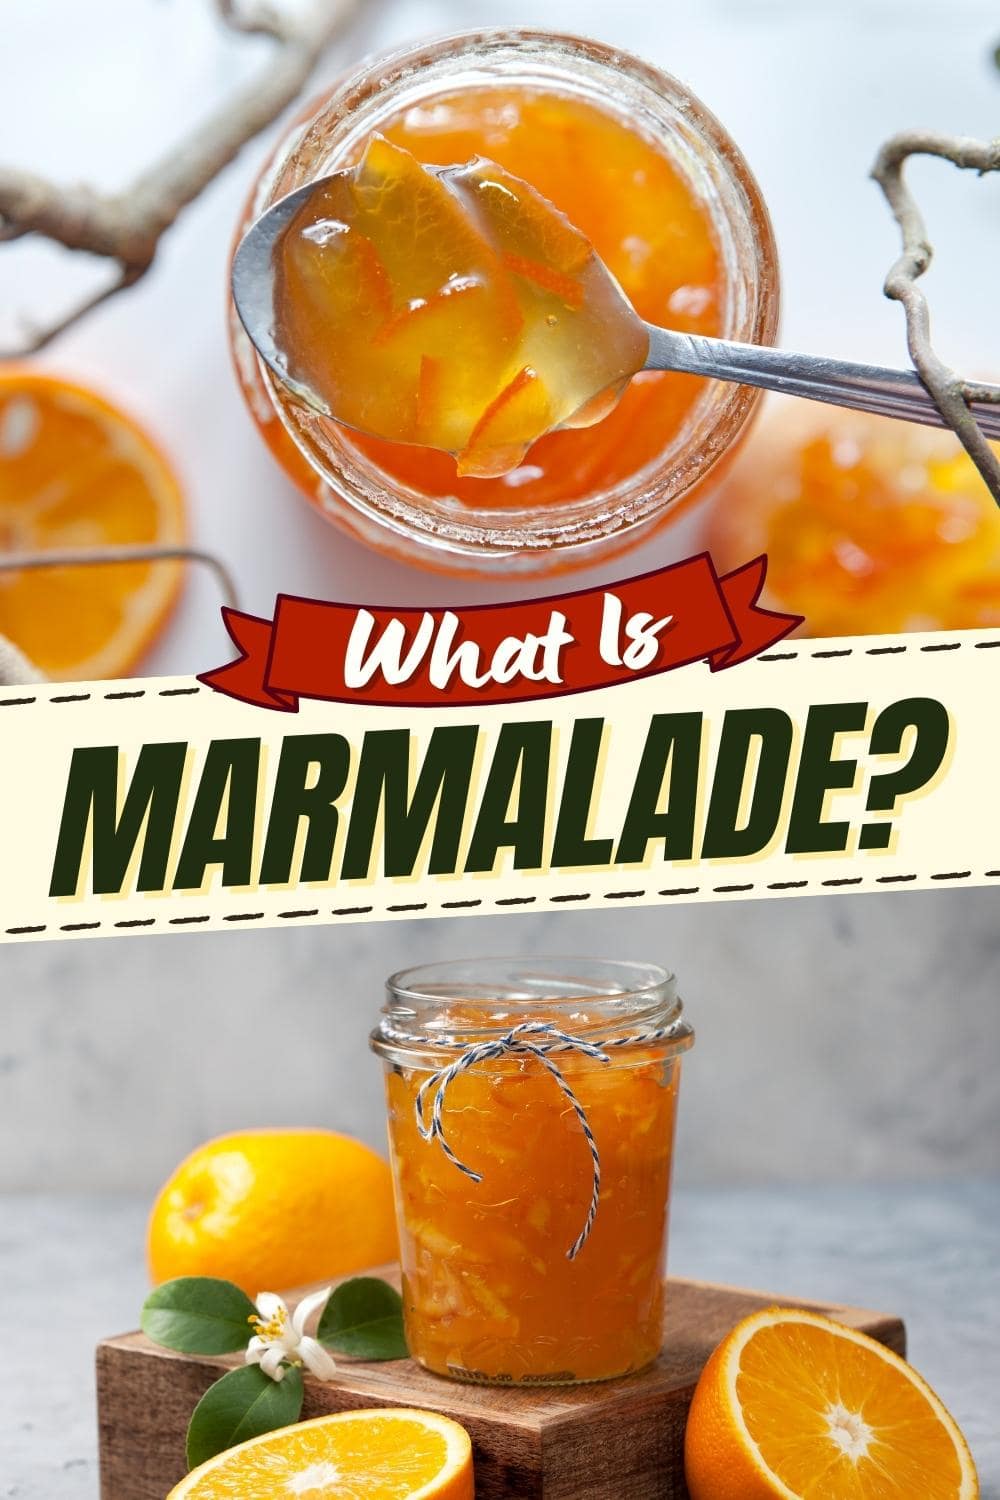 What Is Marmalade?